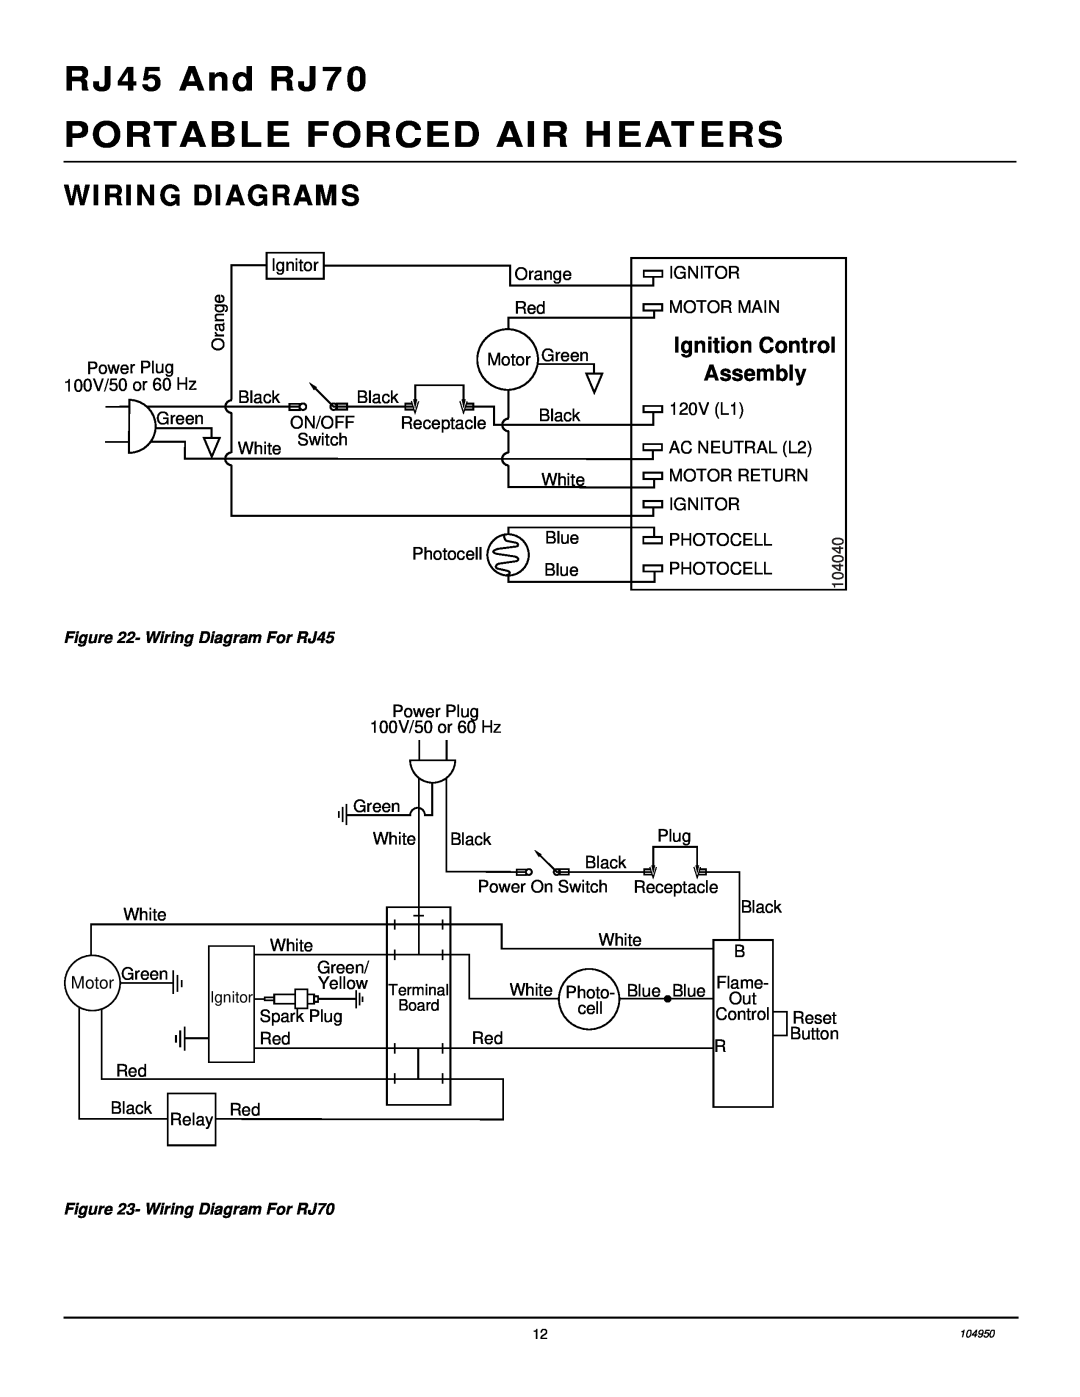 Desa owner manual Wiring Diagrams, Ignition Control Assembly, Portable Forced Air Heaters, RJ45 And RJ70 